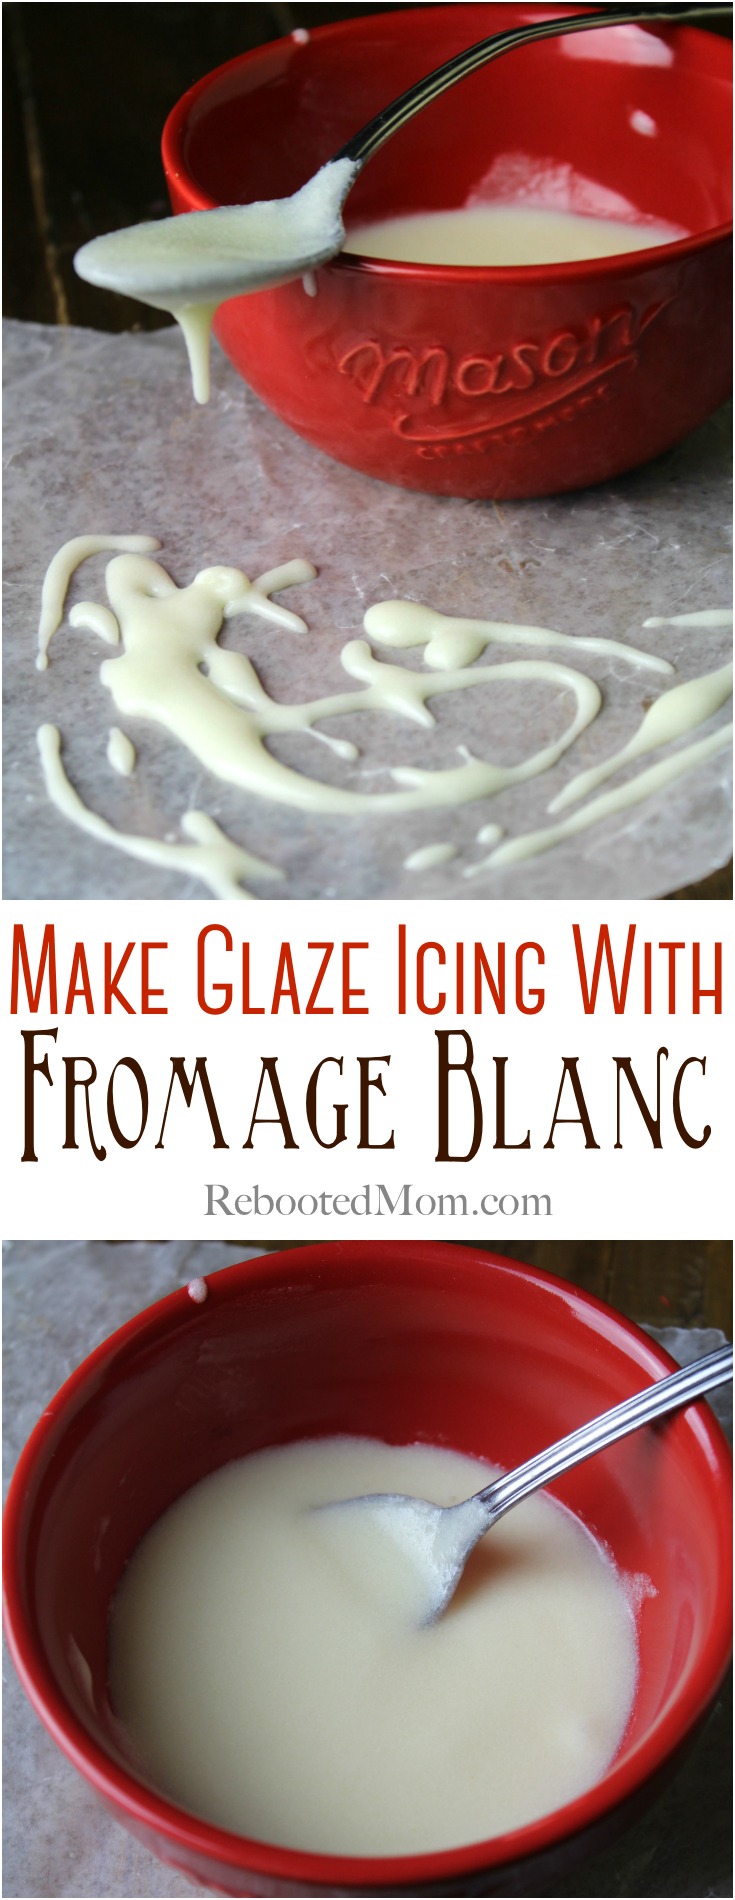 Fromage Blanc joins together with 3 other simple ingredients to make this delicious Fromage Blanc Glaze Icing for cakes, breads or even cupcakes!